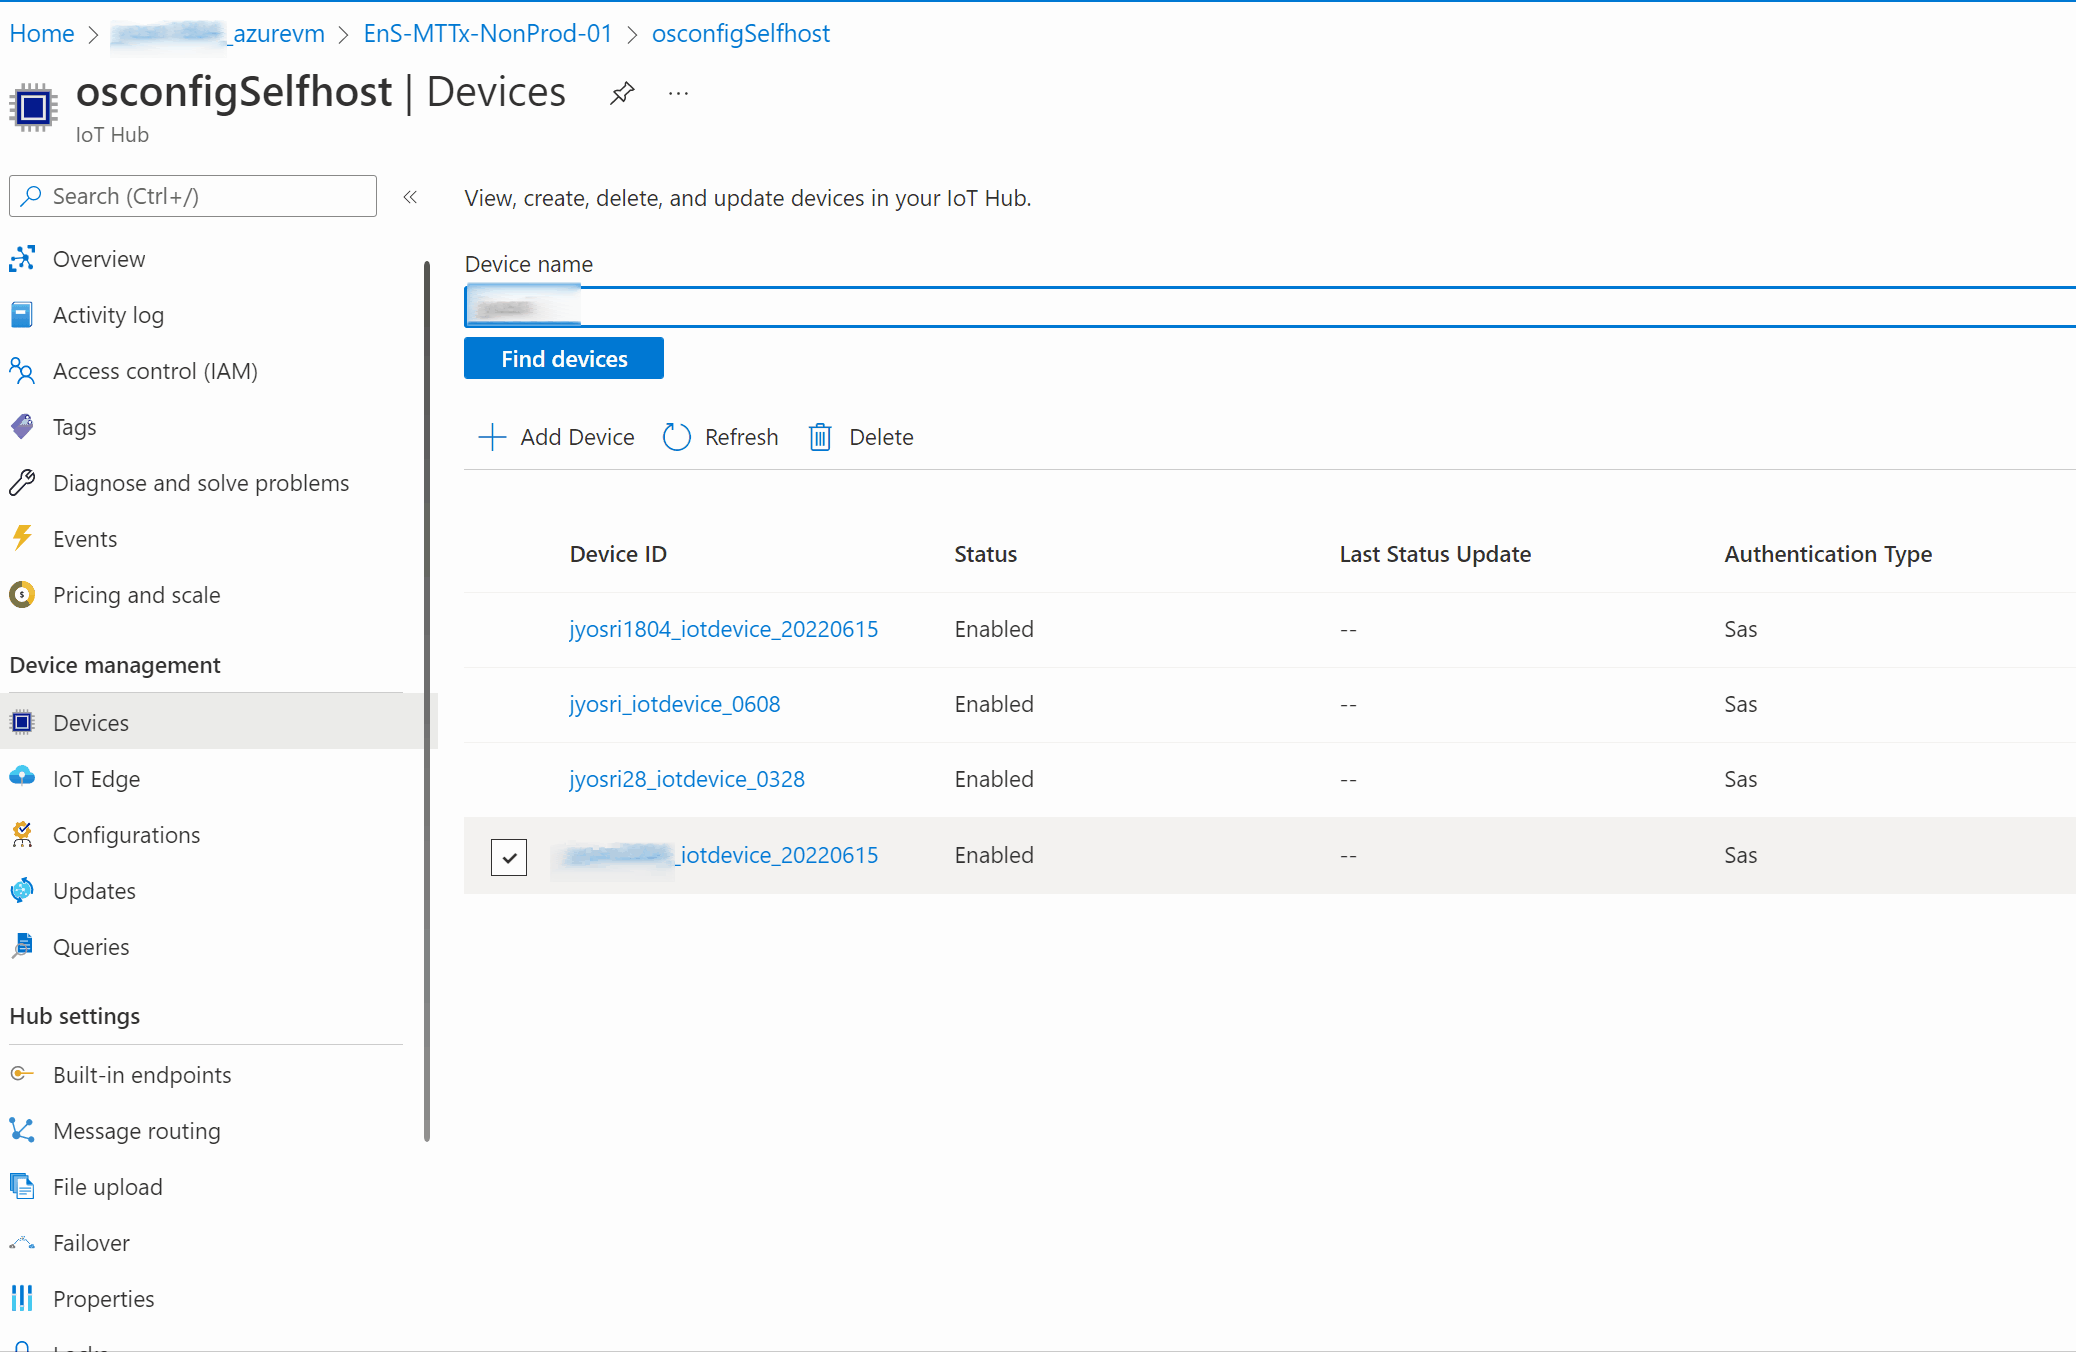 Screen capture showing how to reboot a specific device using OSConfig module from Azure Portal